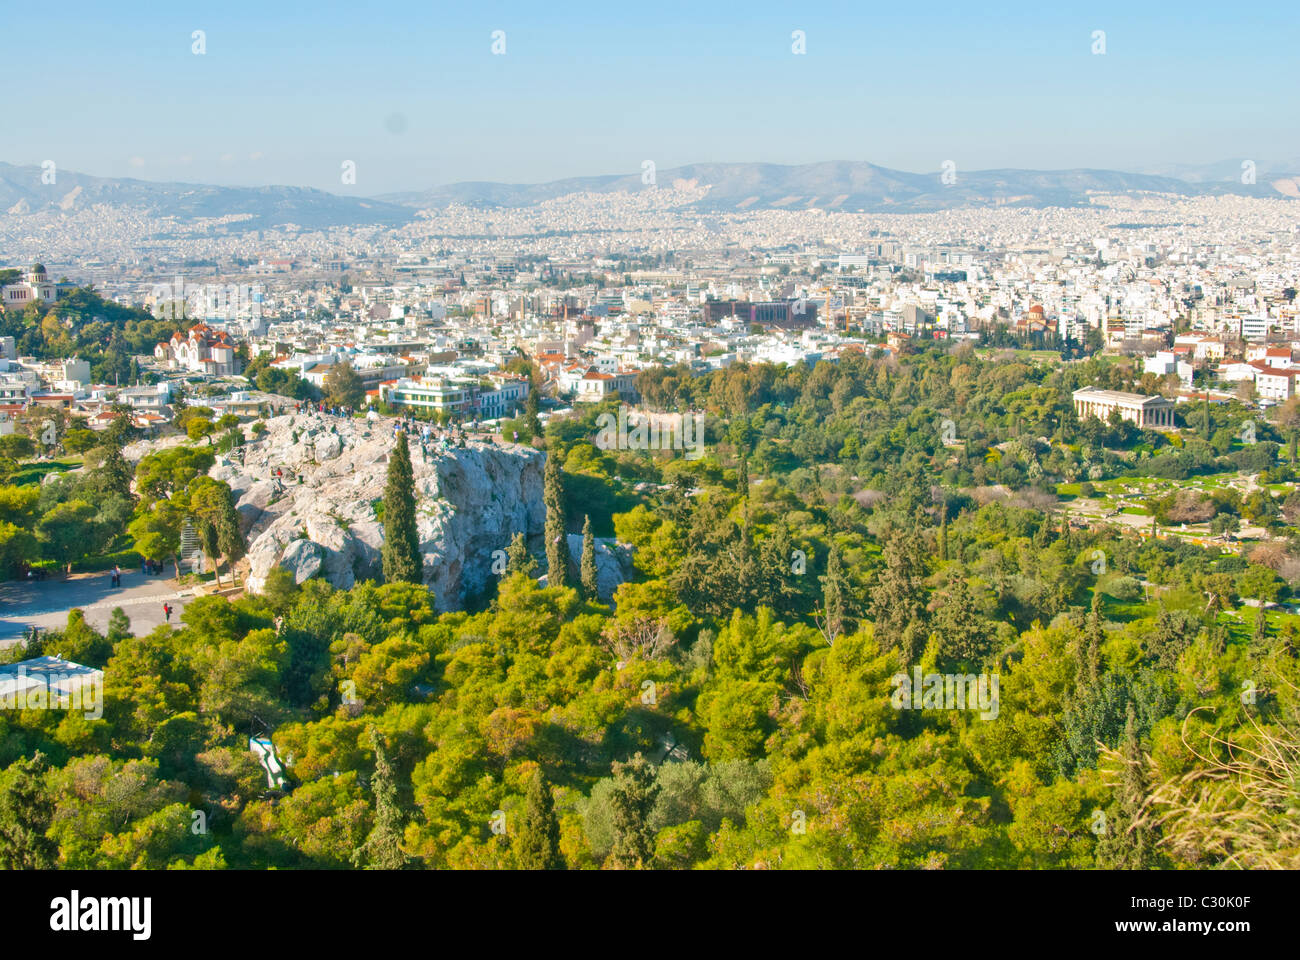 Athens, is the capital and largest city of Greece. Athens dominates the Attica periphery and it is one of the world's oldest cit Stock Photo